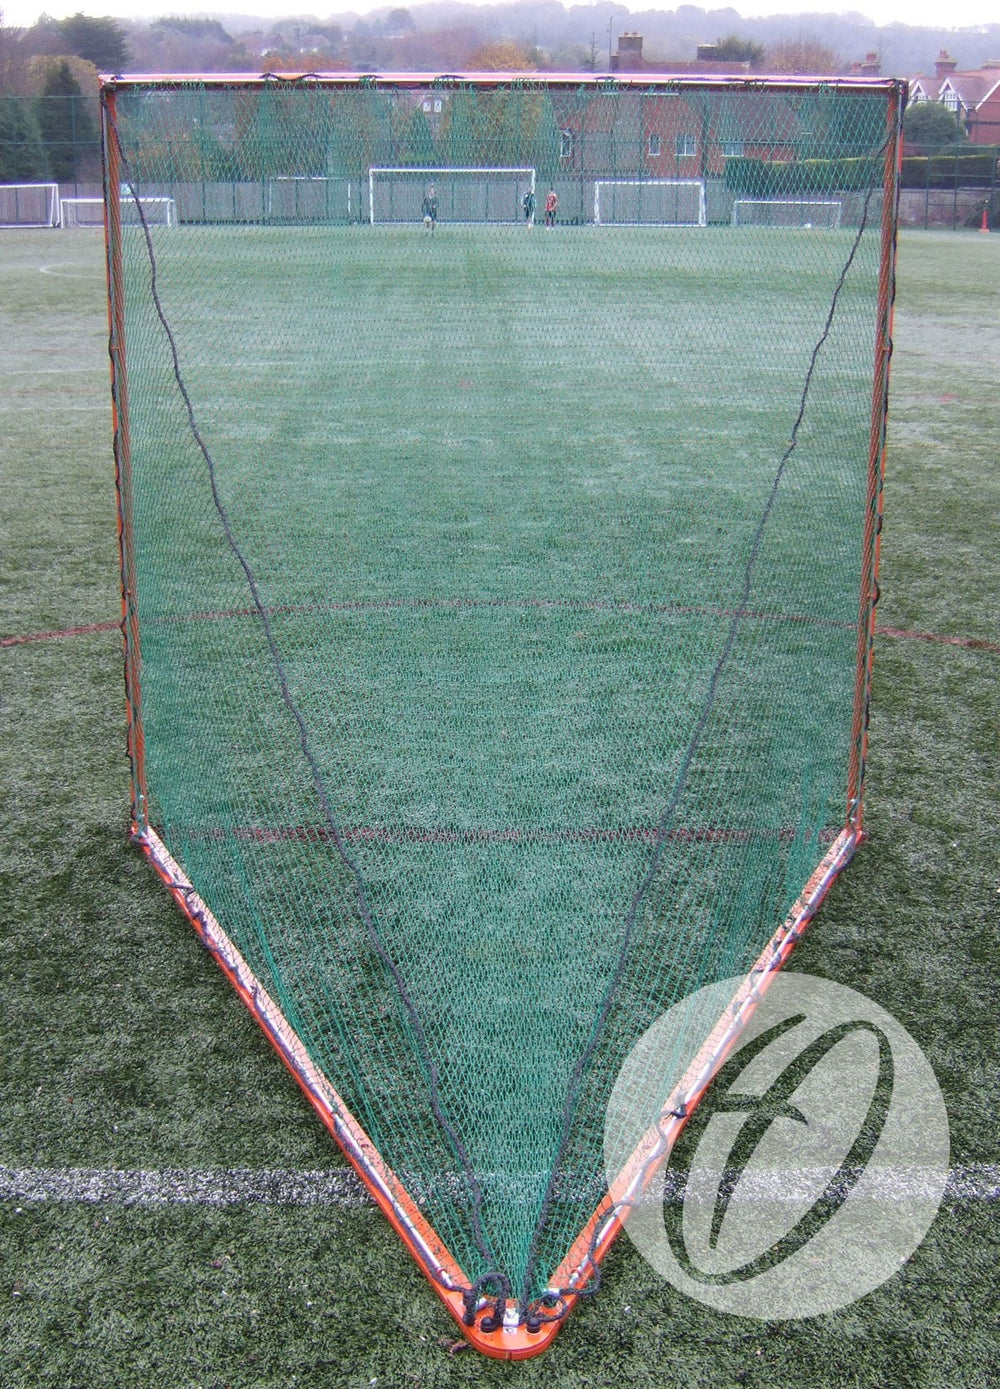 Freestanding Competition Lacrosse Goals